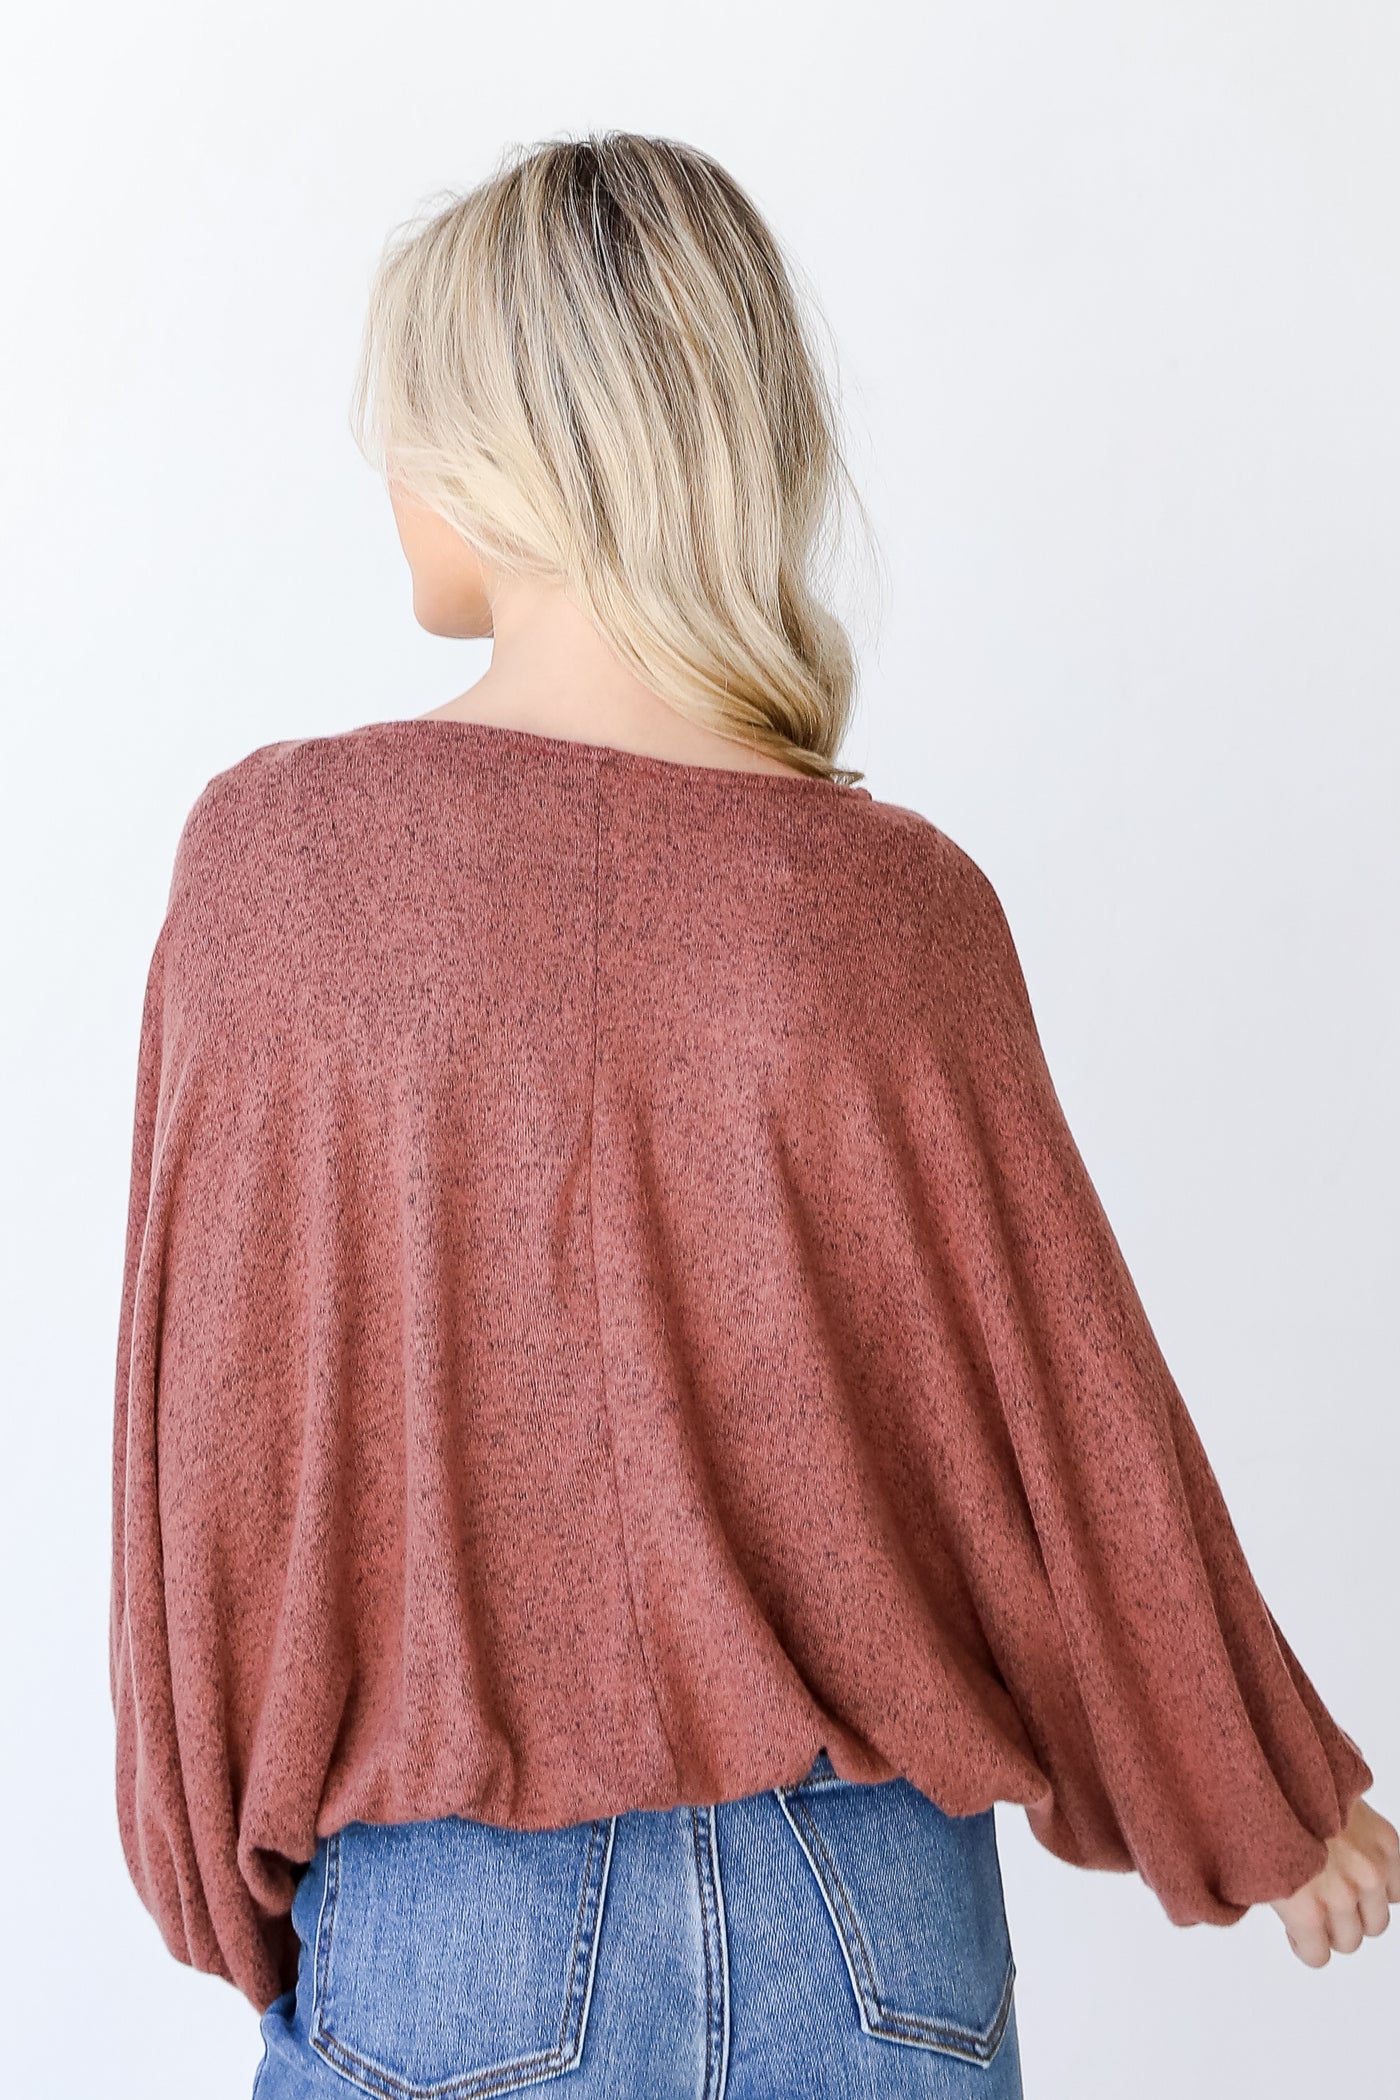 Brushed Knit Top back view